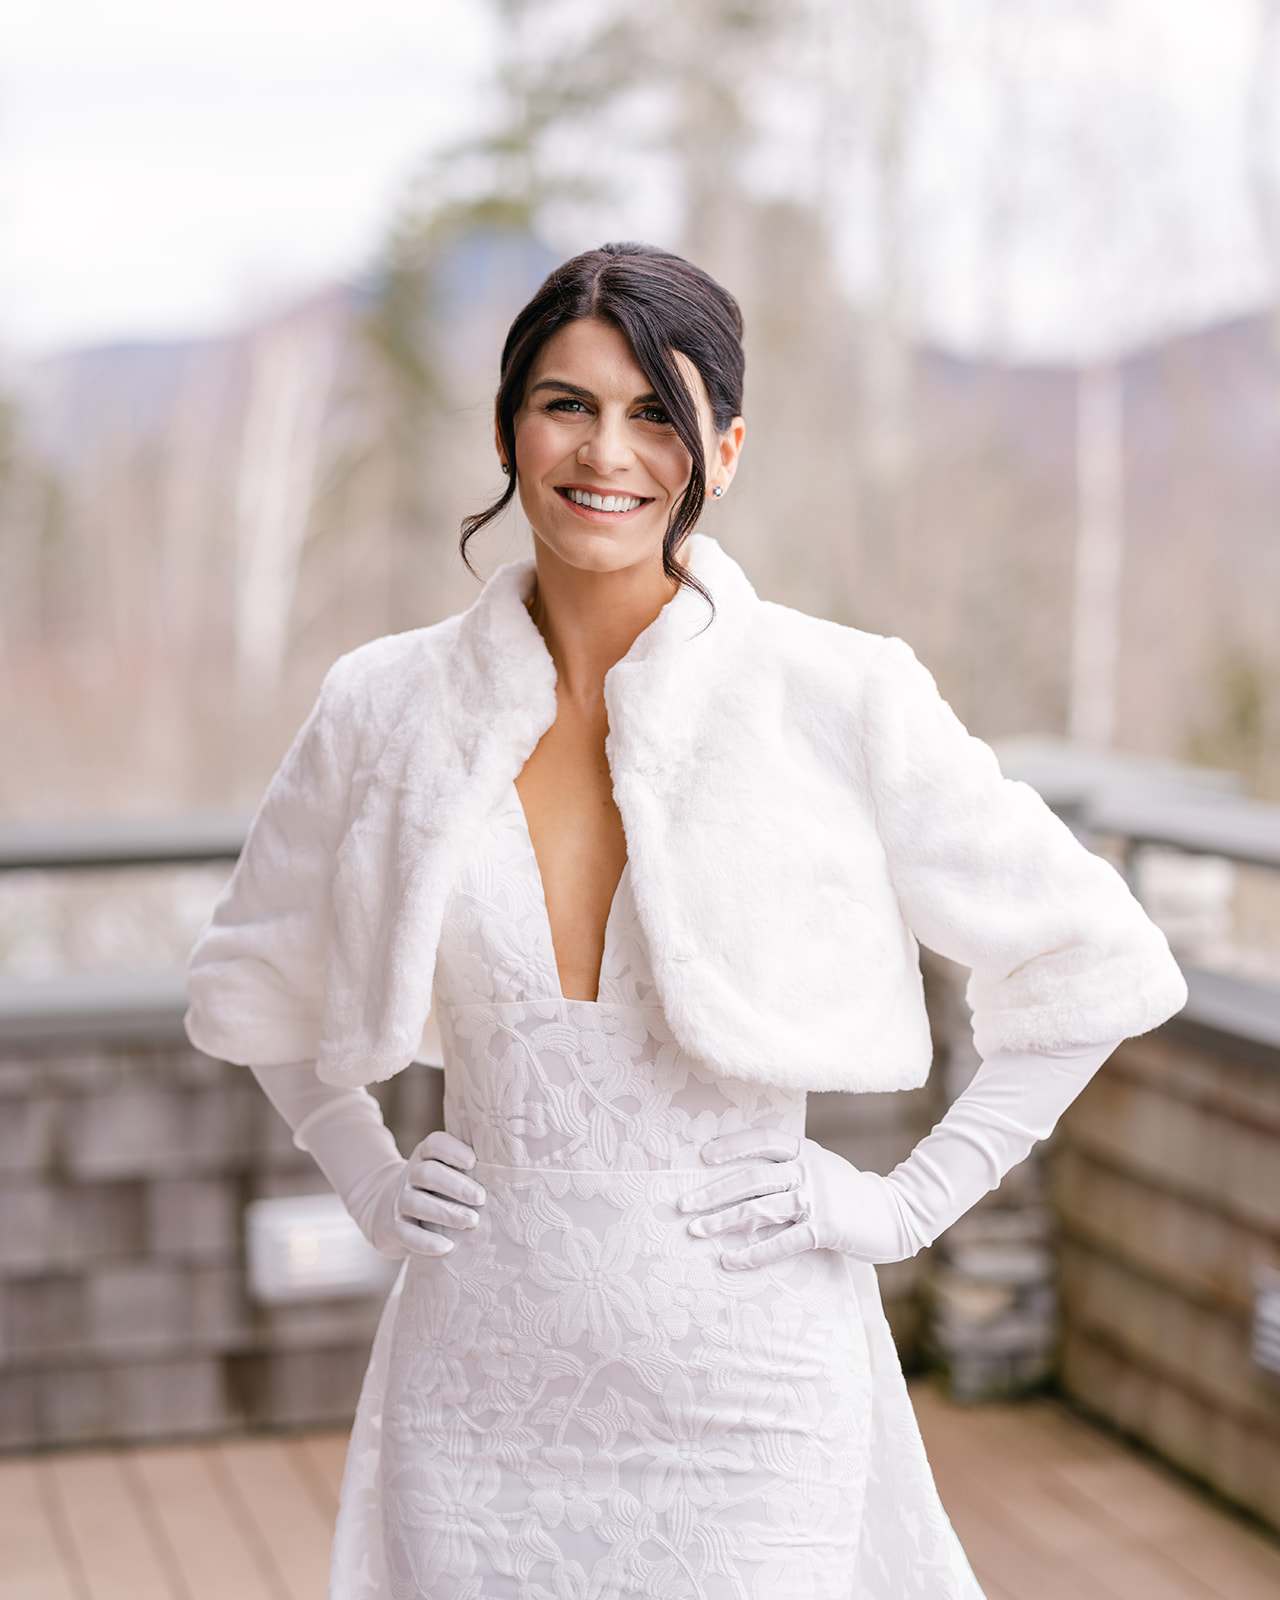 What to wear to a winter wedding in Vermont